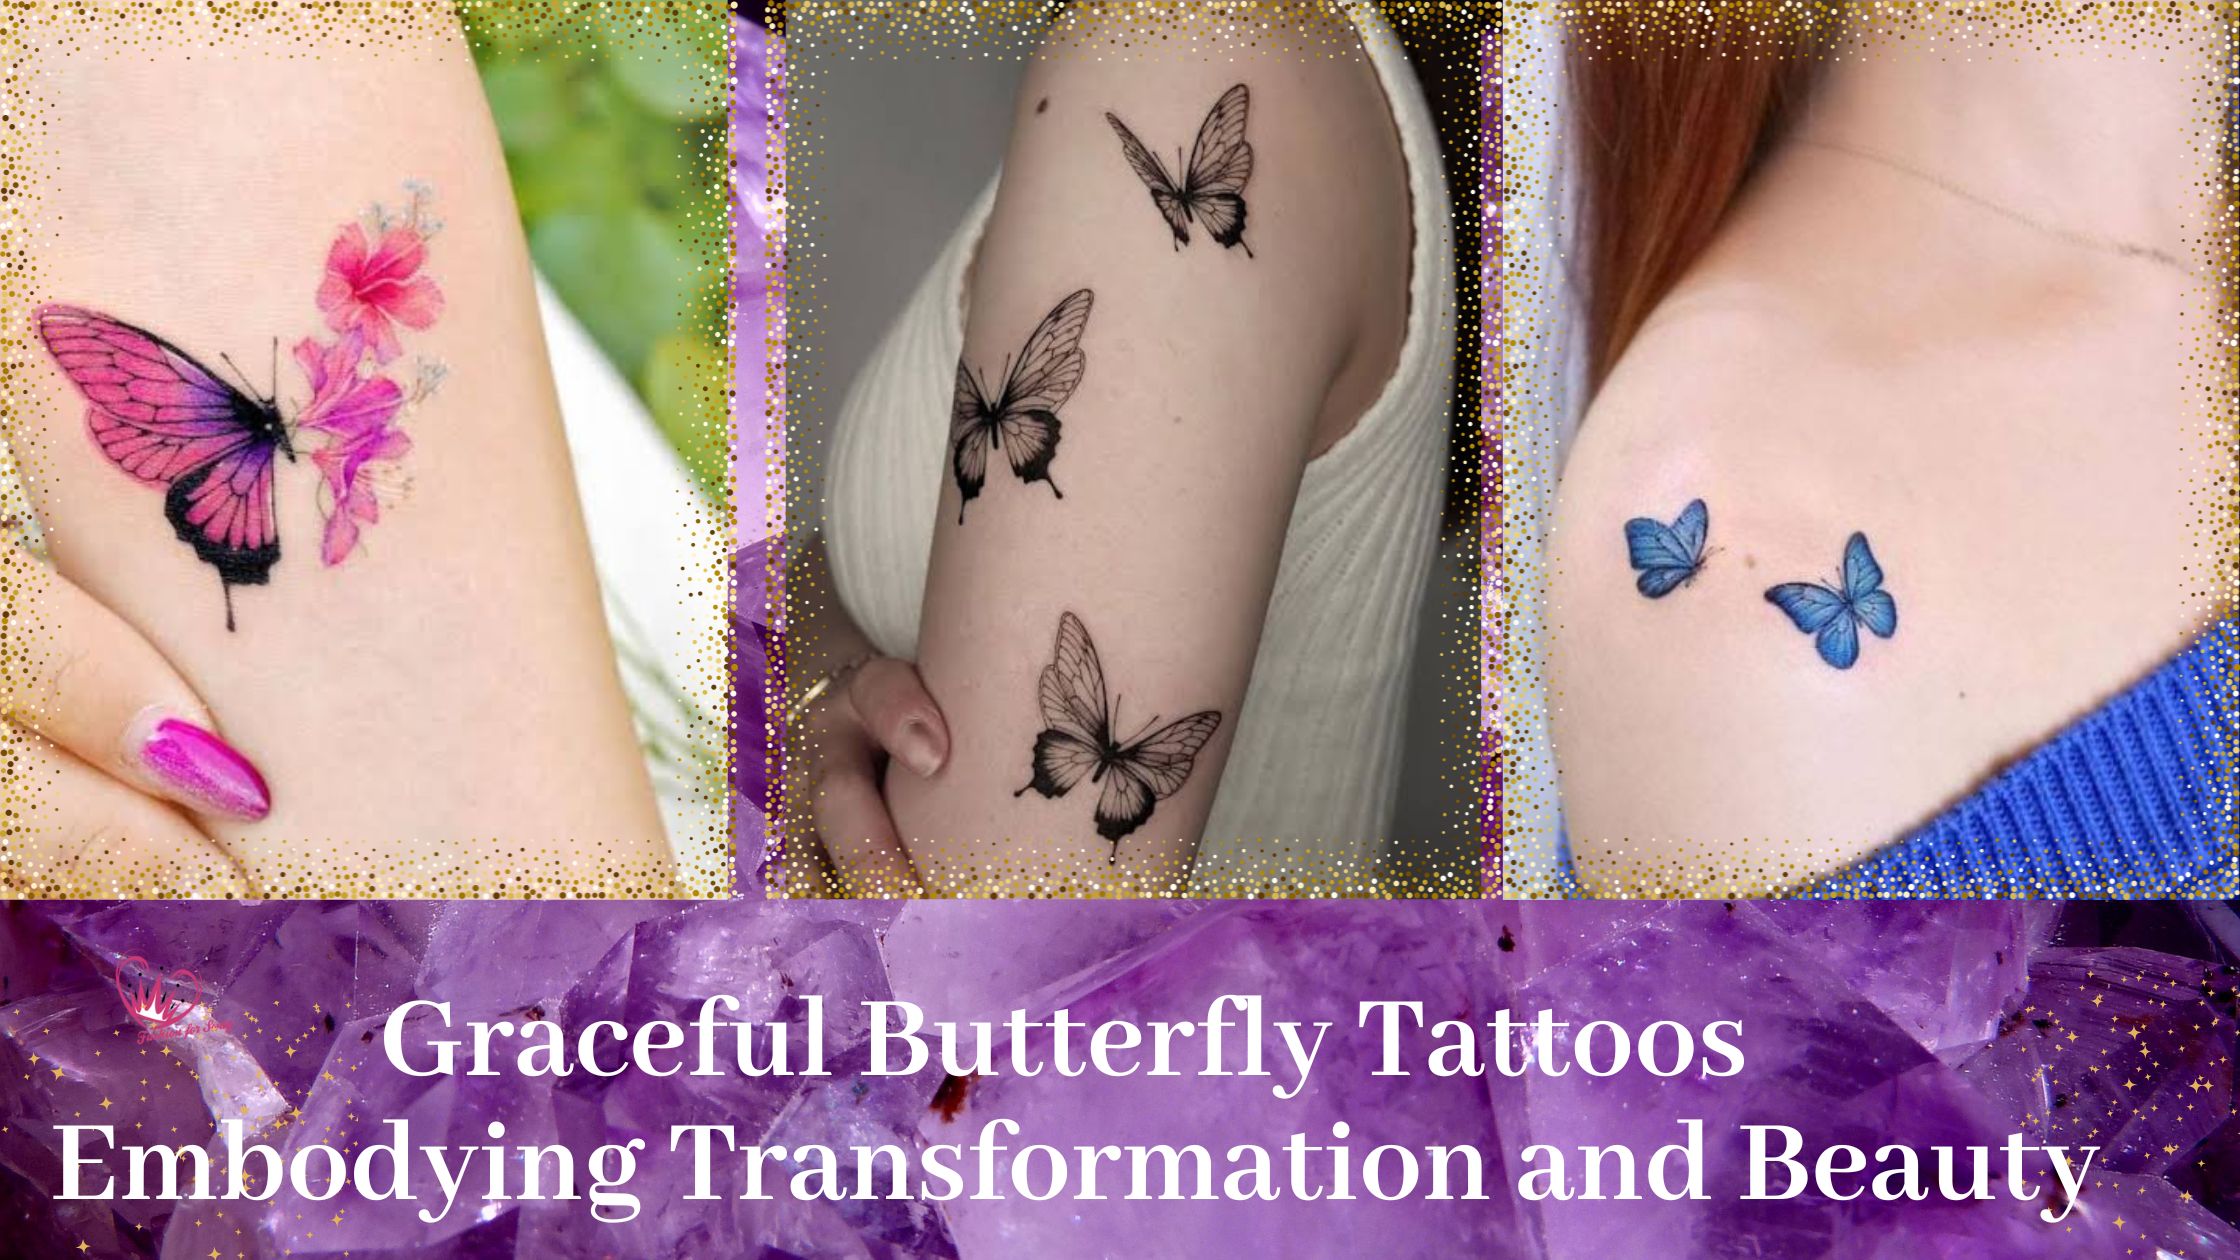 Graceful Butterfly Tattoos: Embodying Transformation and Beauty